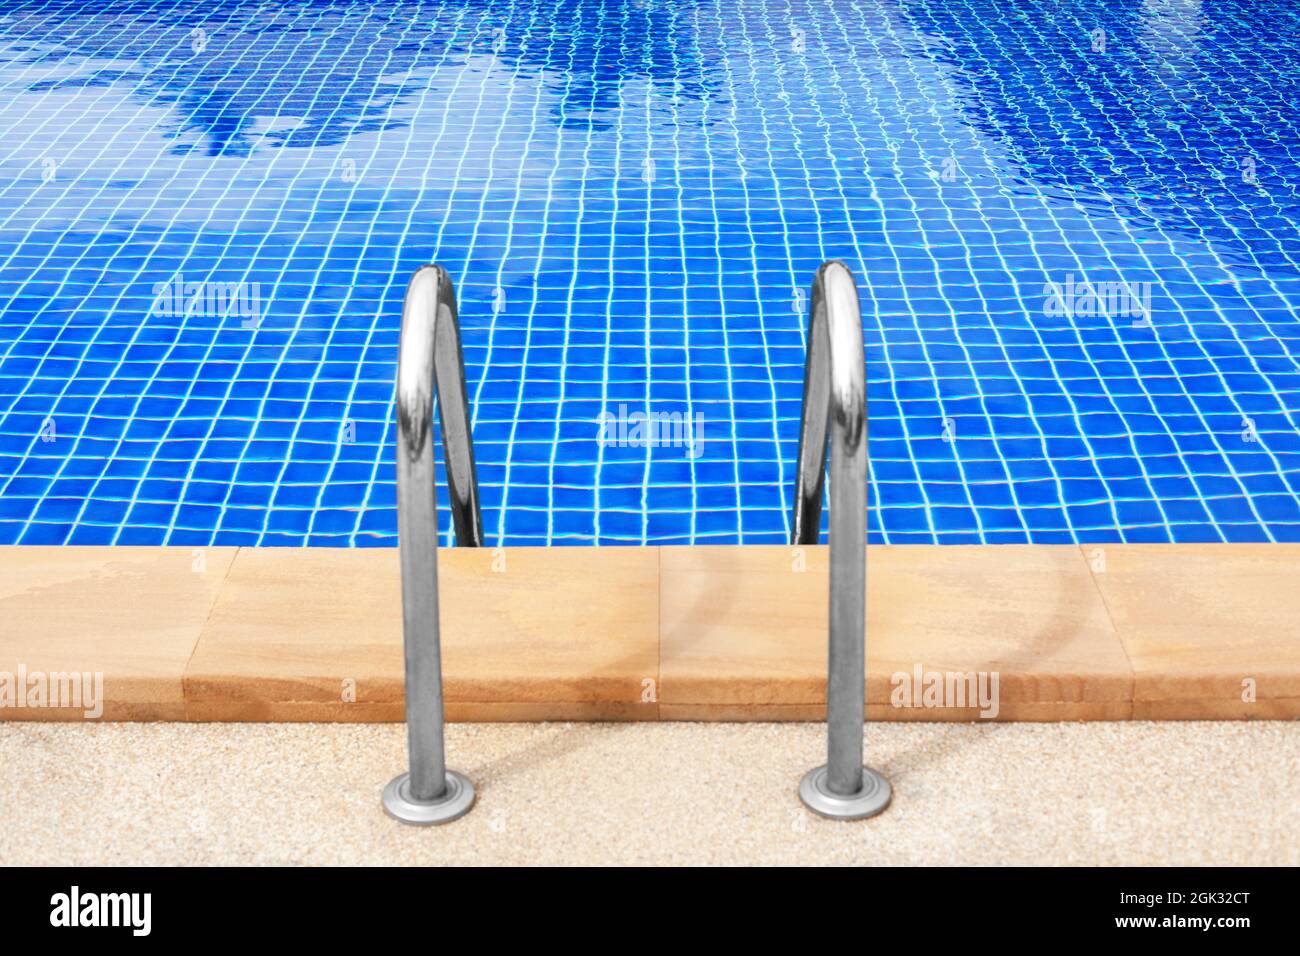 Swimming pool entrance stair closeup, metal grab bar ladder, swimming pool wooden deck edge, poolside blue water background, sea beach summer holidays Stock Photo